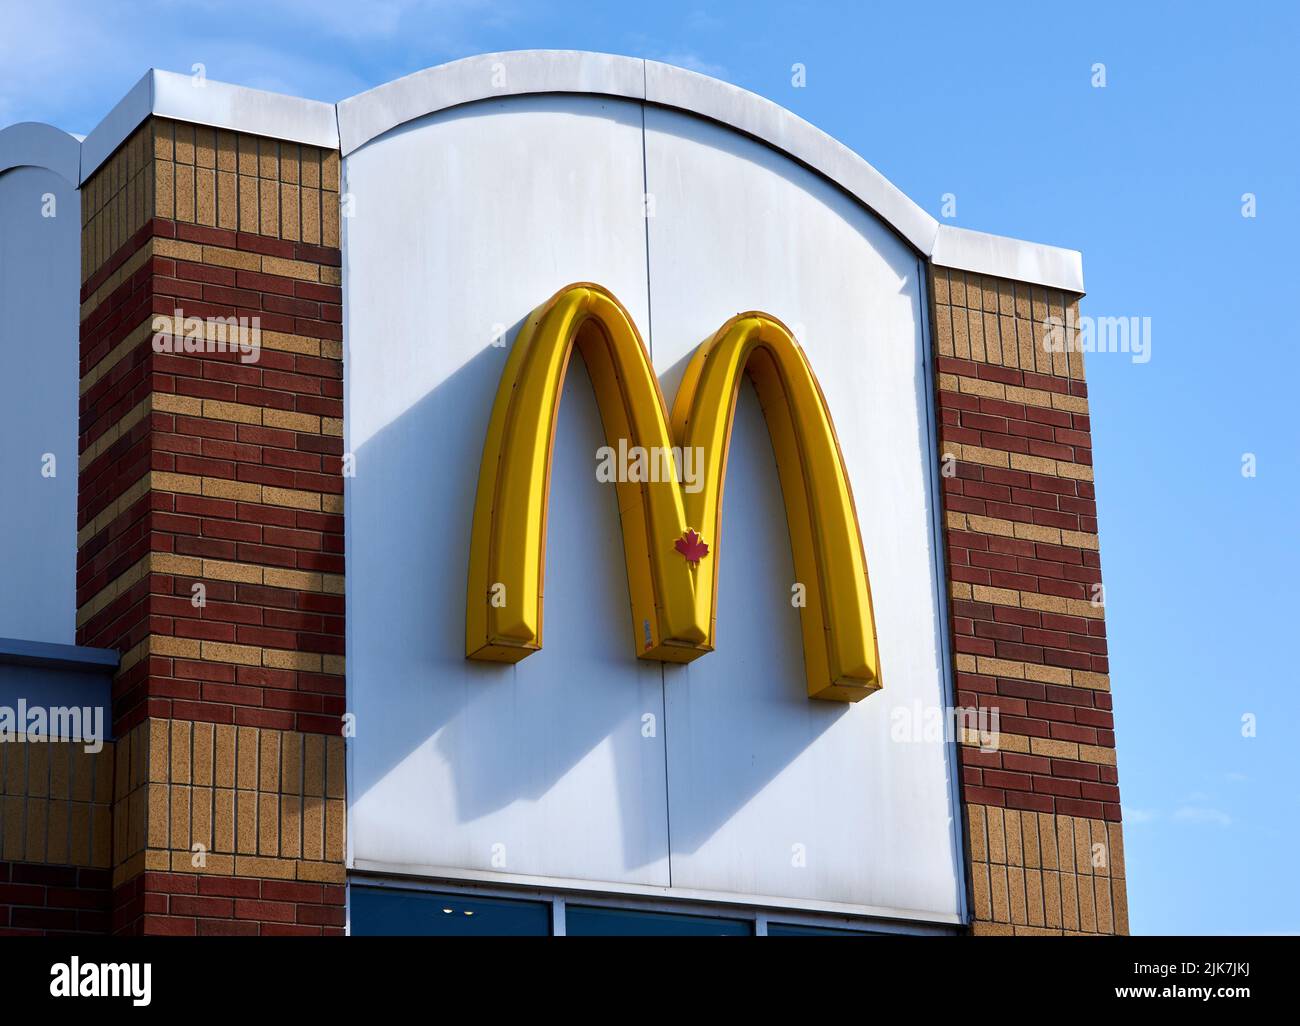 Montreal, Canada - April 4, 2022: McDonald logo on the restaurant building. McDonald's is the world's largest restaurant chain by revenue, serving ove Stock Photo